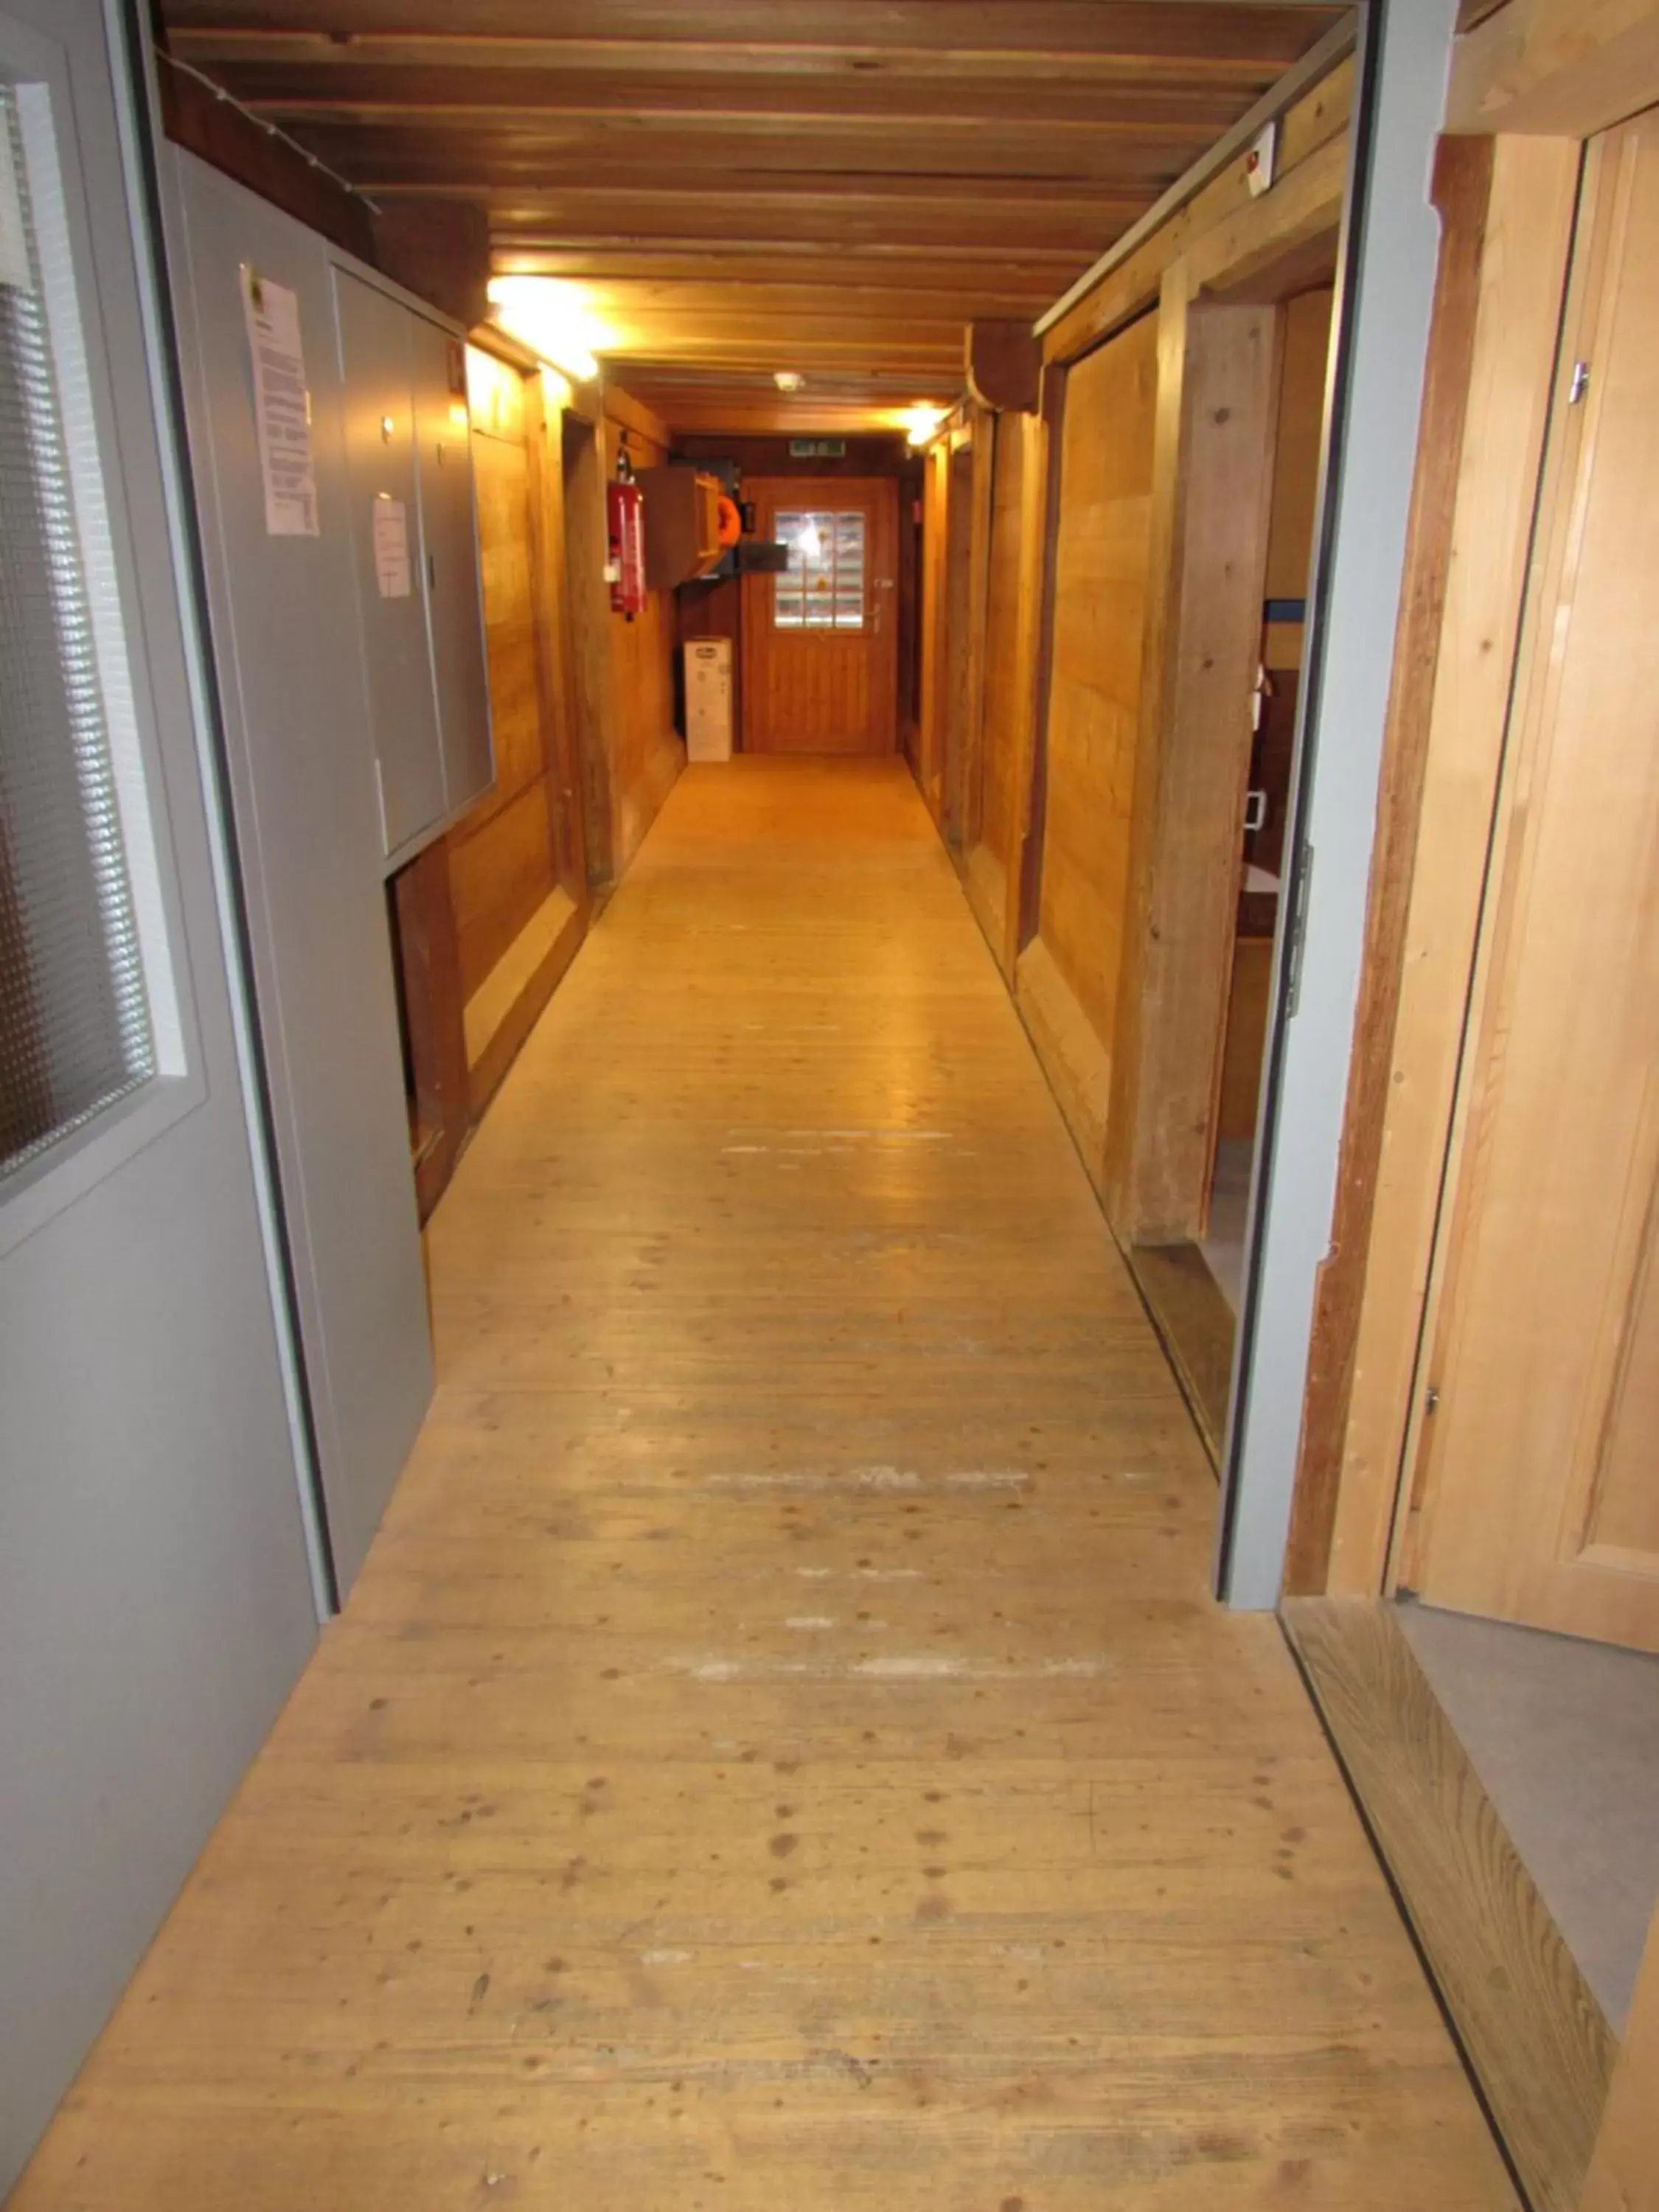 Area and facilities in Emme Lodge